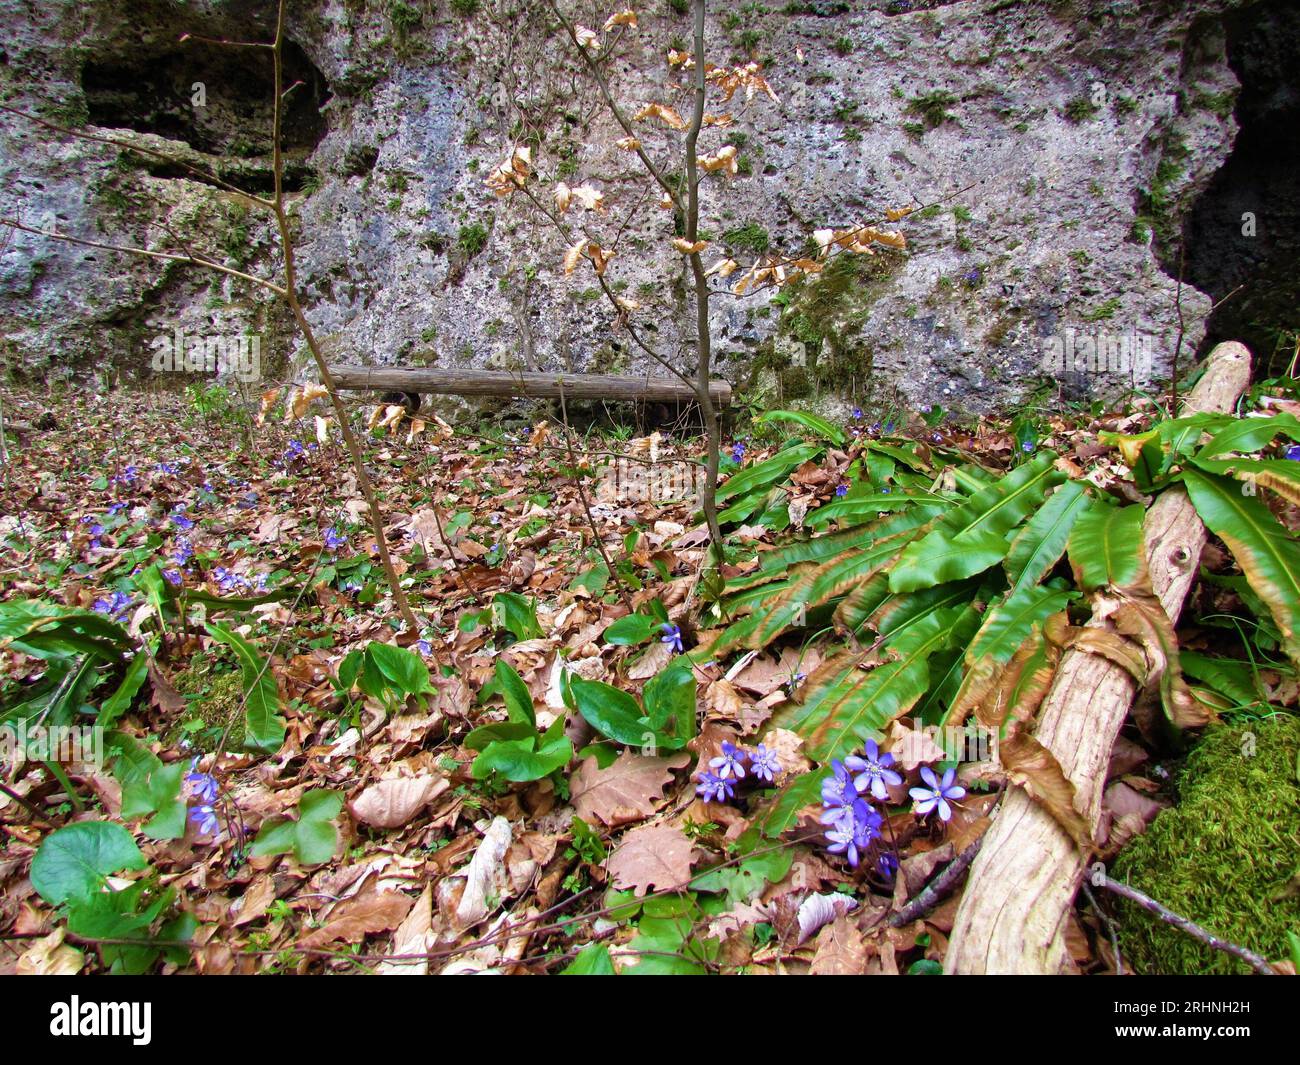 Blue anemone hepatica flowers and hart's tongue fern plants covering the ground and a wooden bench next to rocks Stock Photo